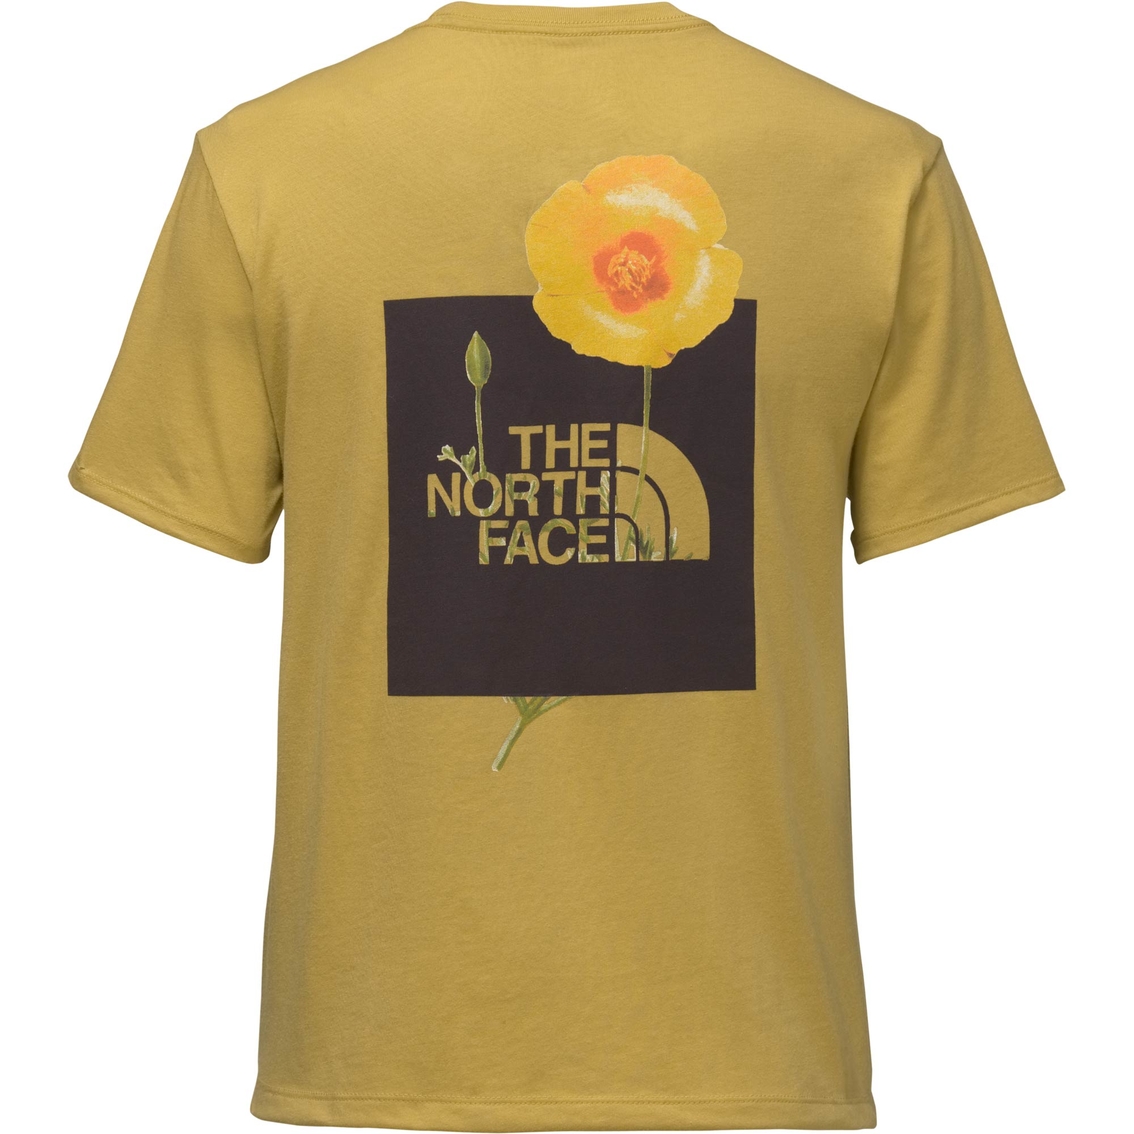 The North Face Bottle Source Red Box Tee - Image 2 of 2